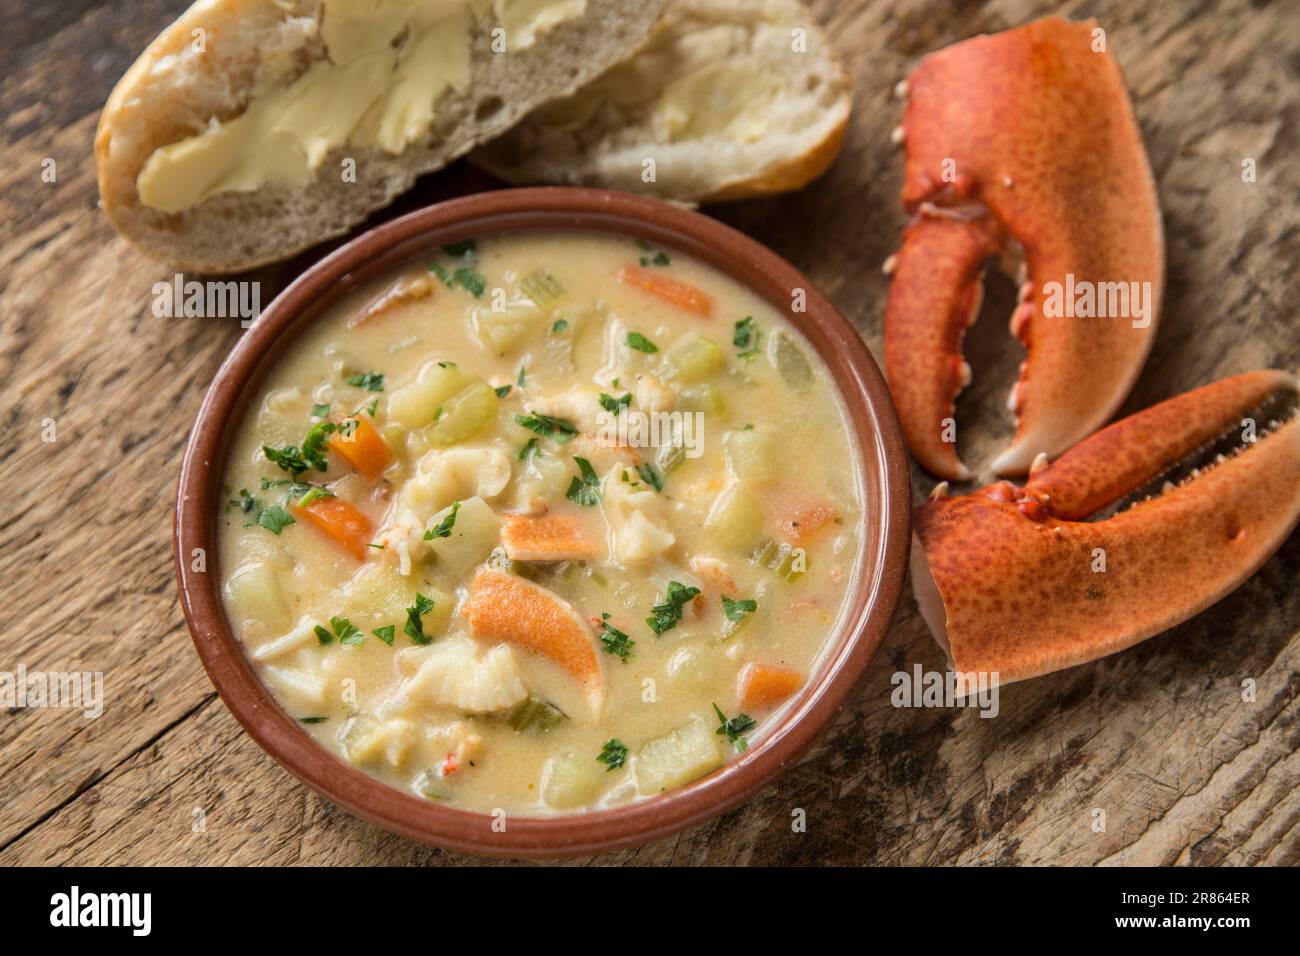 A lobster, Homarus gammarus, that has been caught in the English and homecooked in a chowder. Served in a bowl on a wooden board with buttered bread a Stock Photo